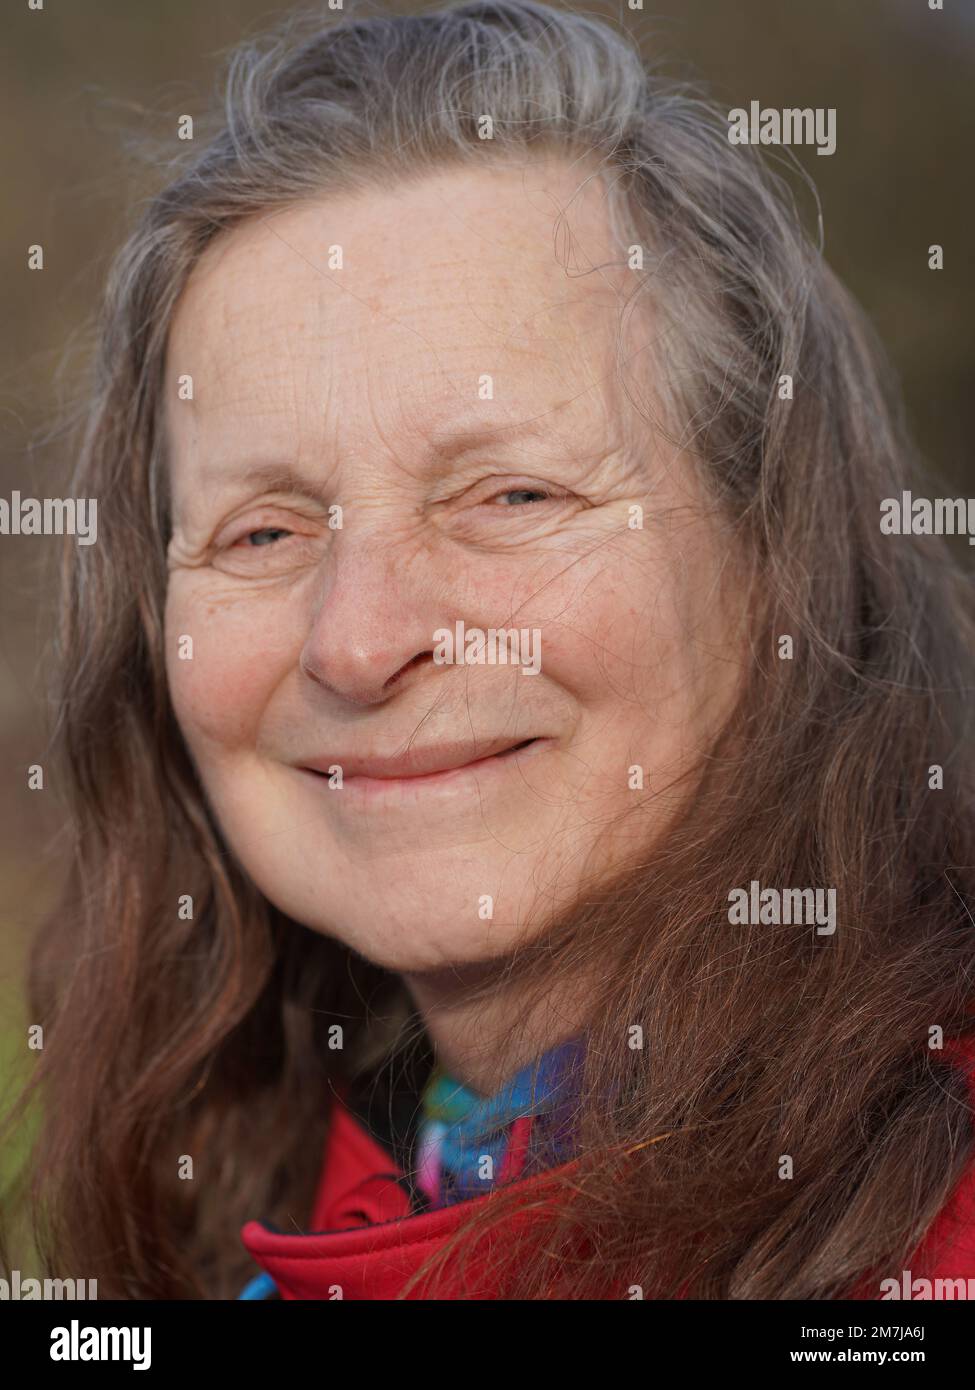 Friendly 63 year old woman without makeup is looking into the camera Stock Photo